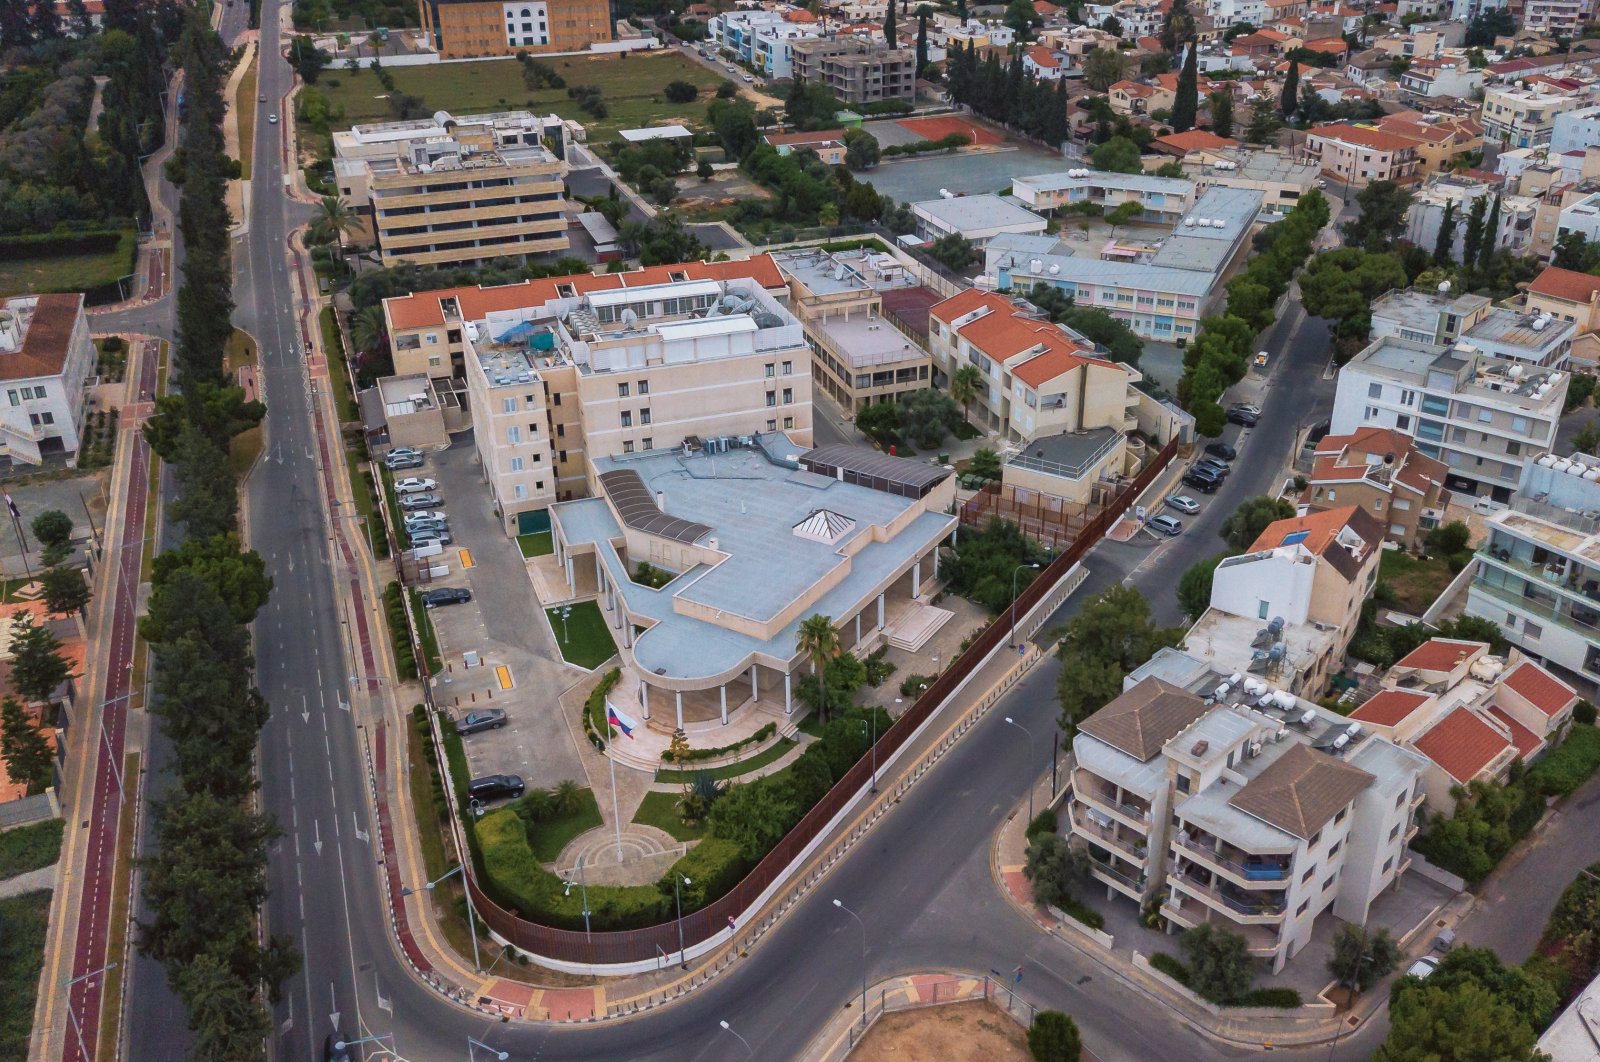 An aerial view of the Russian Embassy in Nicosia, Greek Cyprus, July 14, 2019. (Shutterstock Photo)